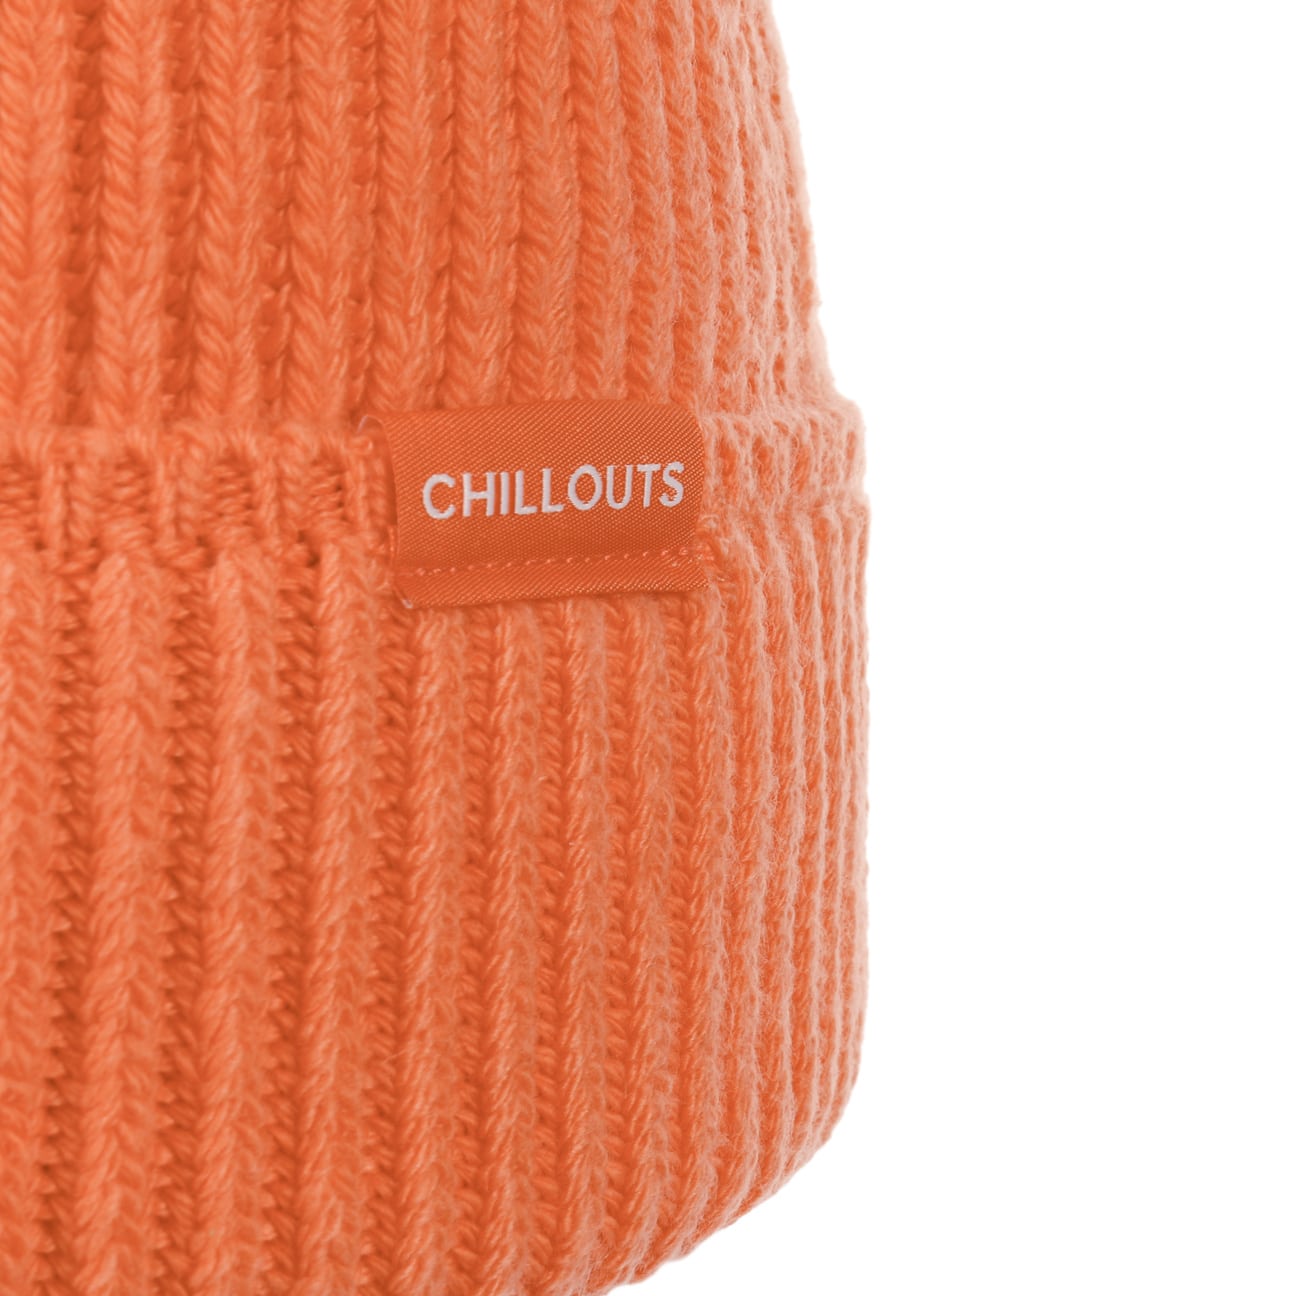 Cotton Meets Wool Umschlagmütze by Chillouts - 29,99 €